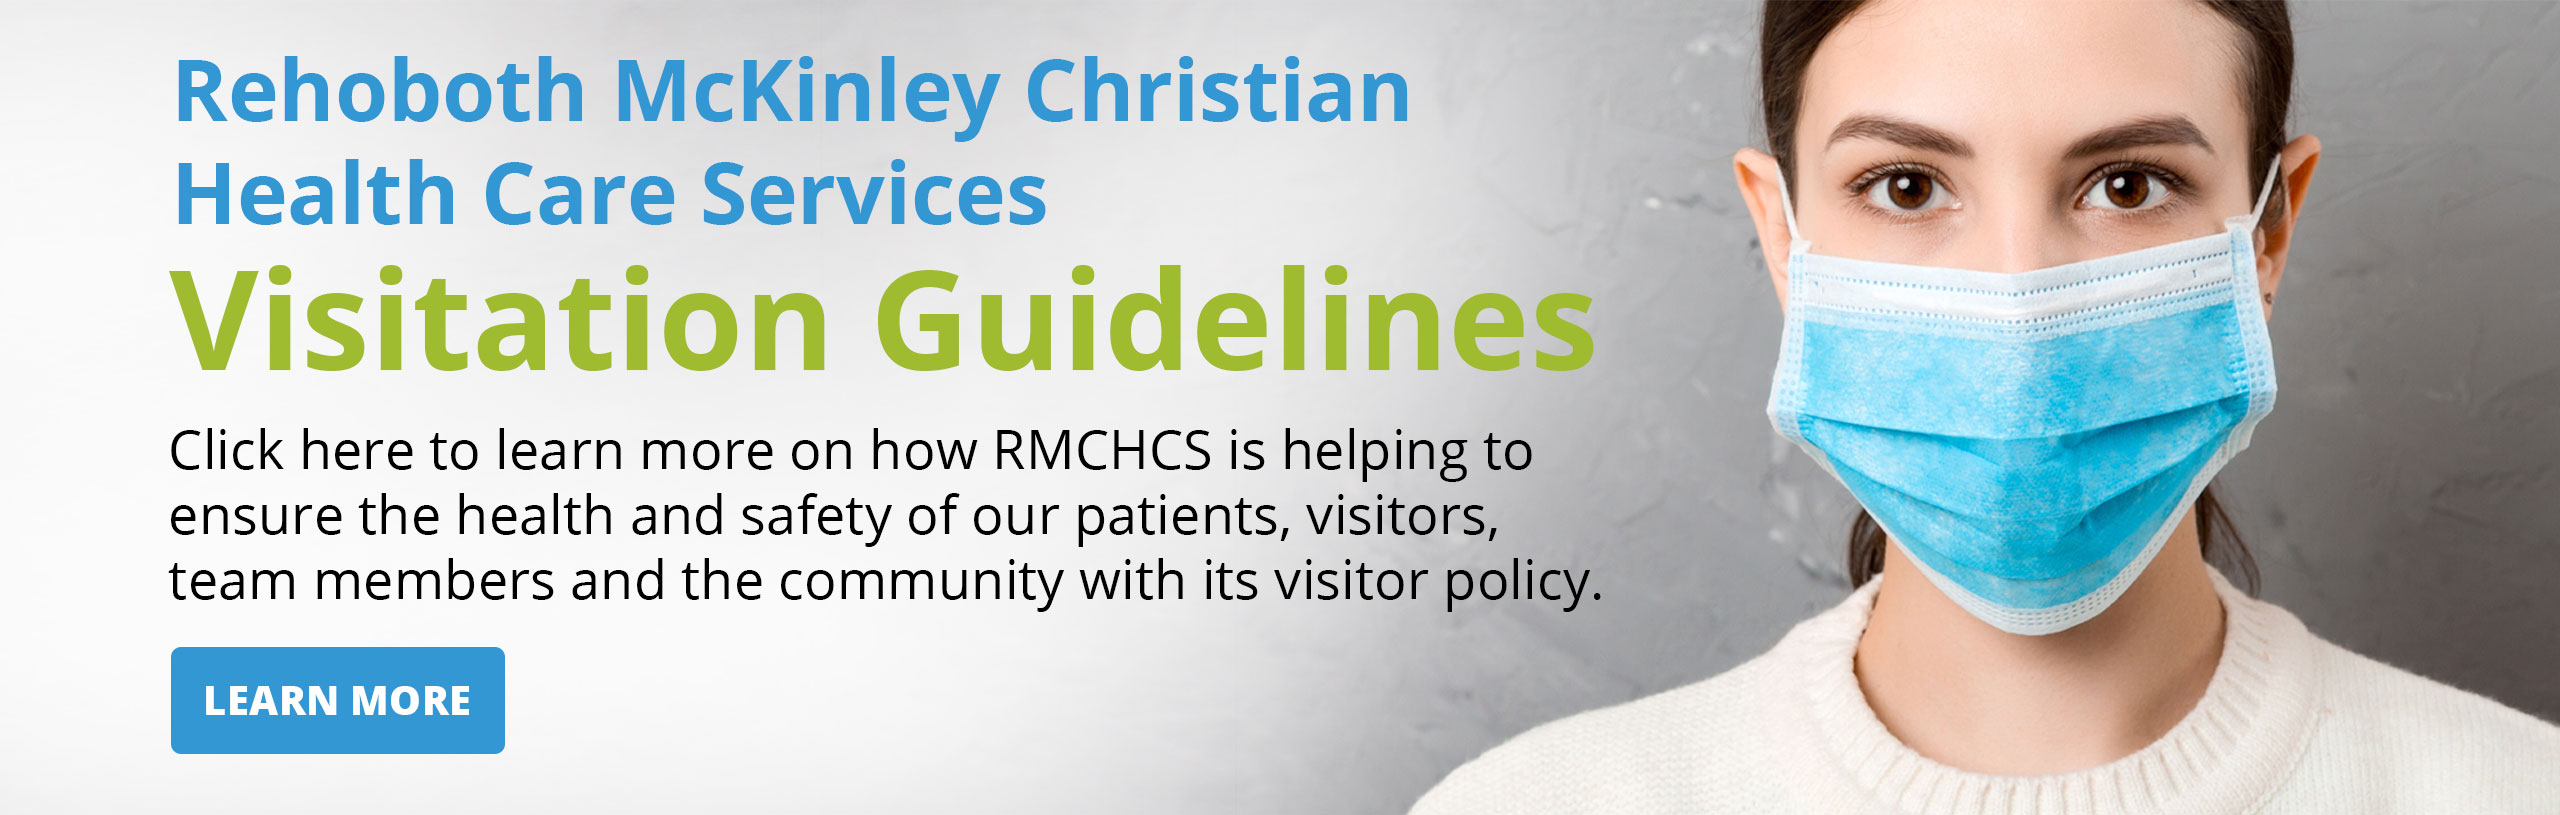 Rehoboth Mckinley Christian Health Care Services
Visitation Guidelines

Click here to learn more on how RMCHCS is helping to ensure the health and safety of our patients, visitors, team members, and the community with it's 

Rehoboth Mckinley Christian Health Care Services

Visitation Guidelines

Click here to learn more on how RMCHCS is helping to ensure the health and safety of our patients, visitors, team members and the community with it's visitor policy.

(((LEARN MORE)))